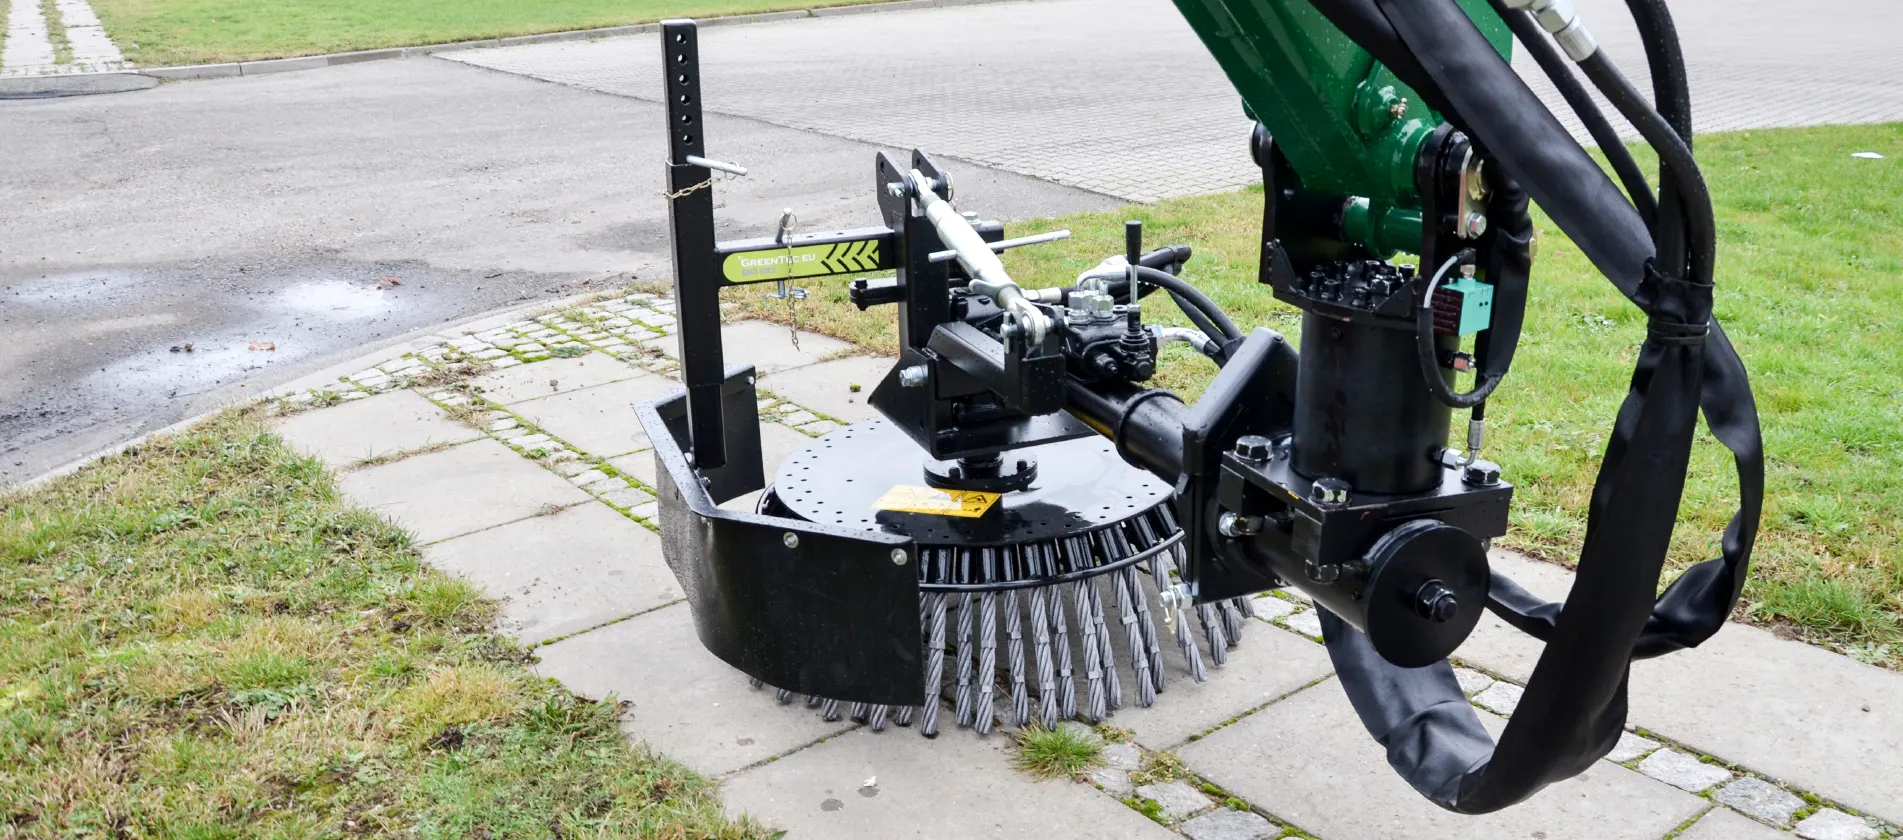 Effective cleaning of pavements and streets with a GreenTec sweeper